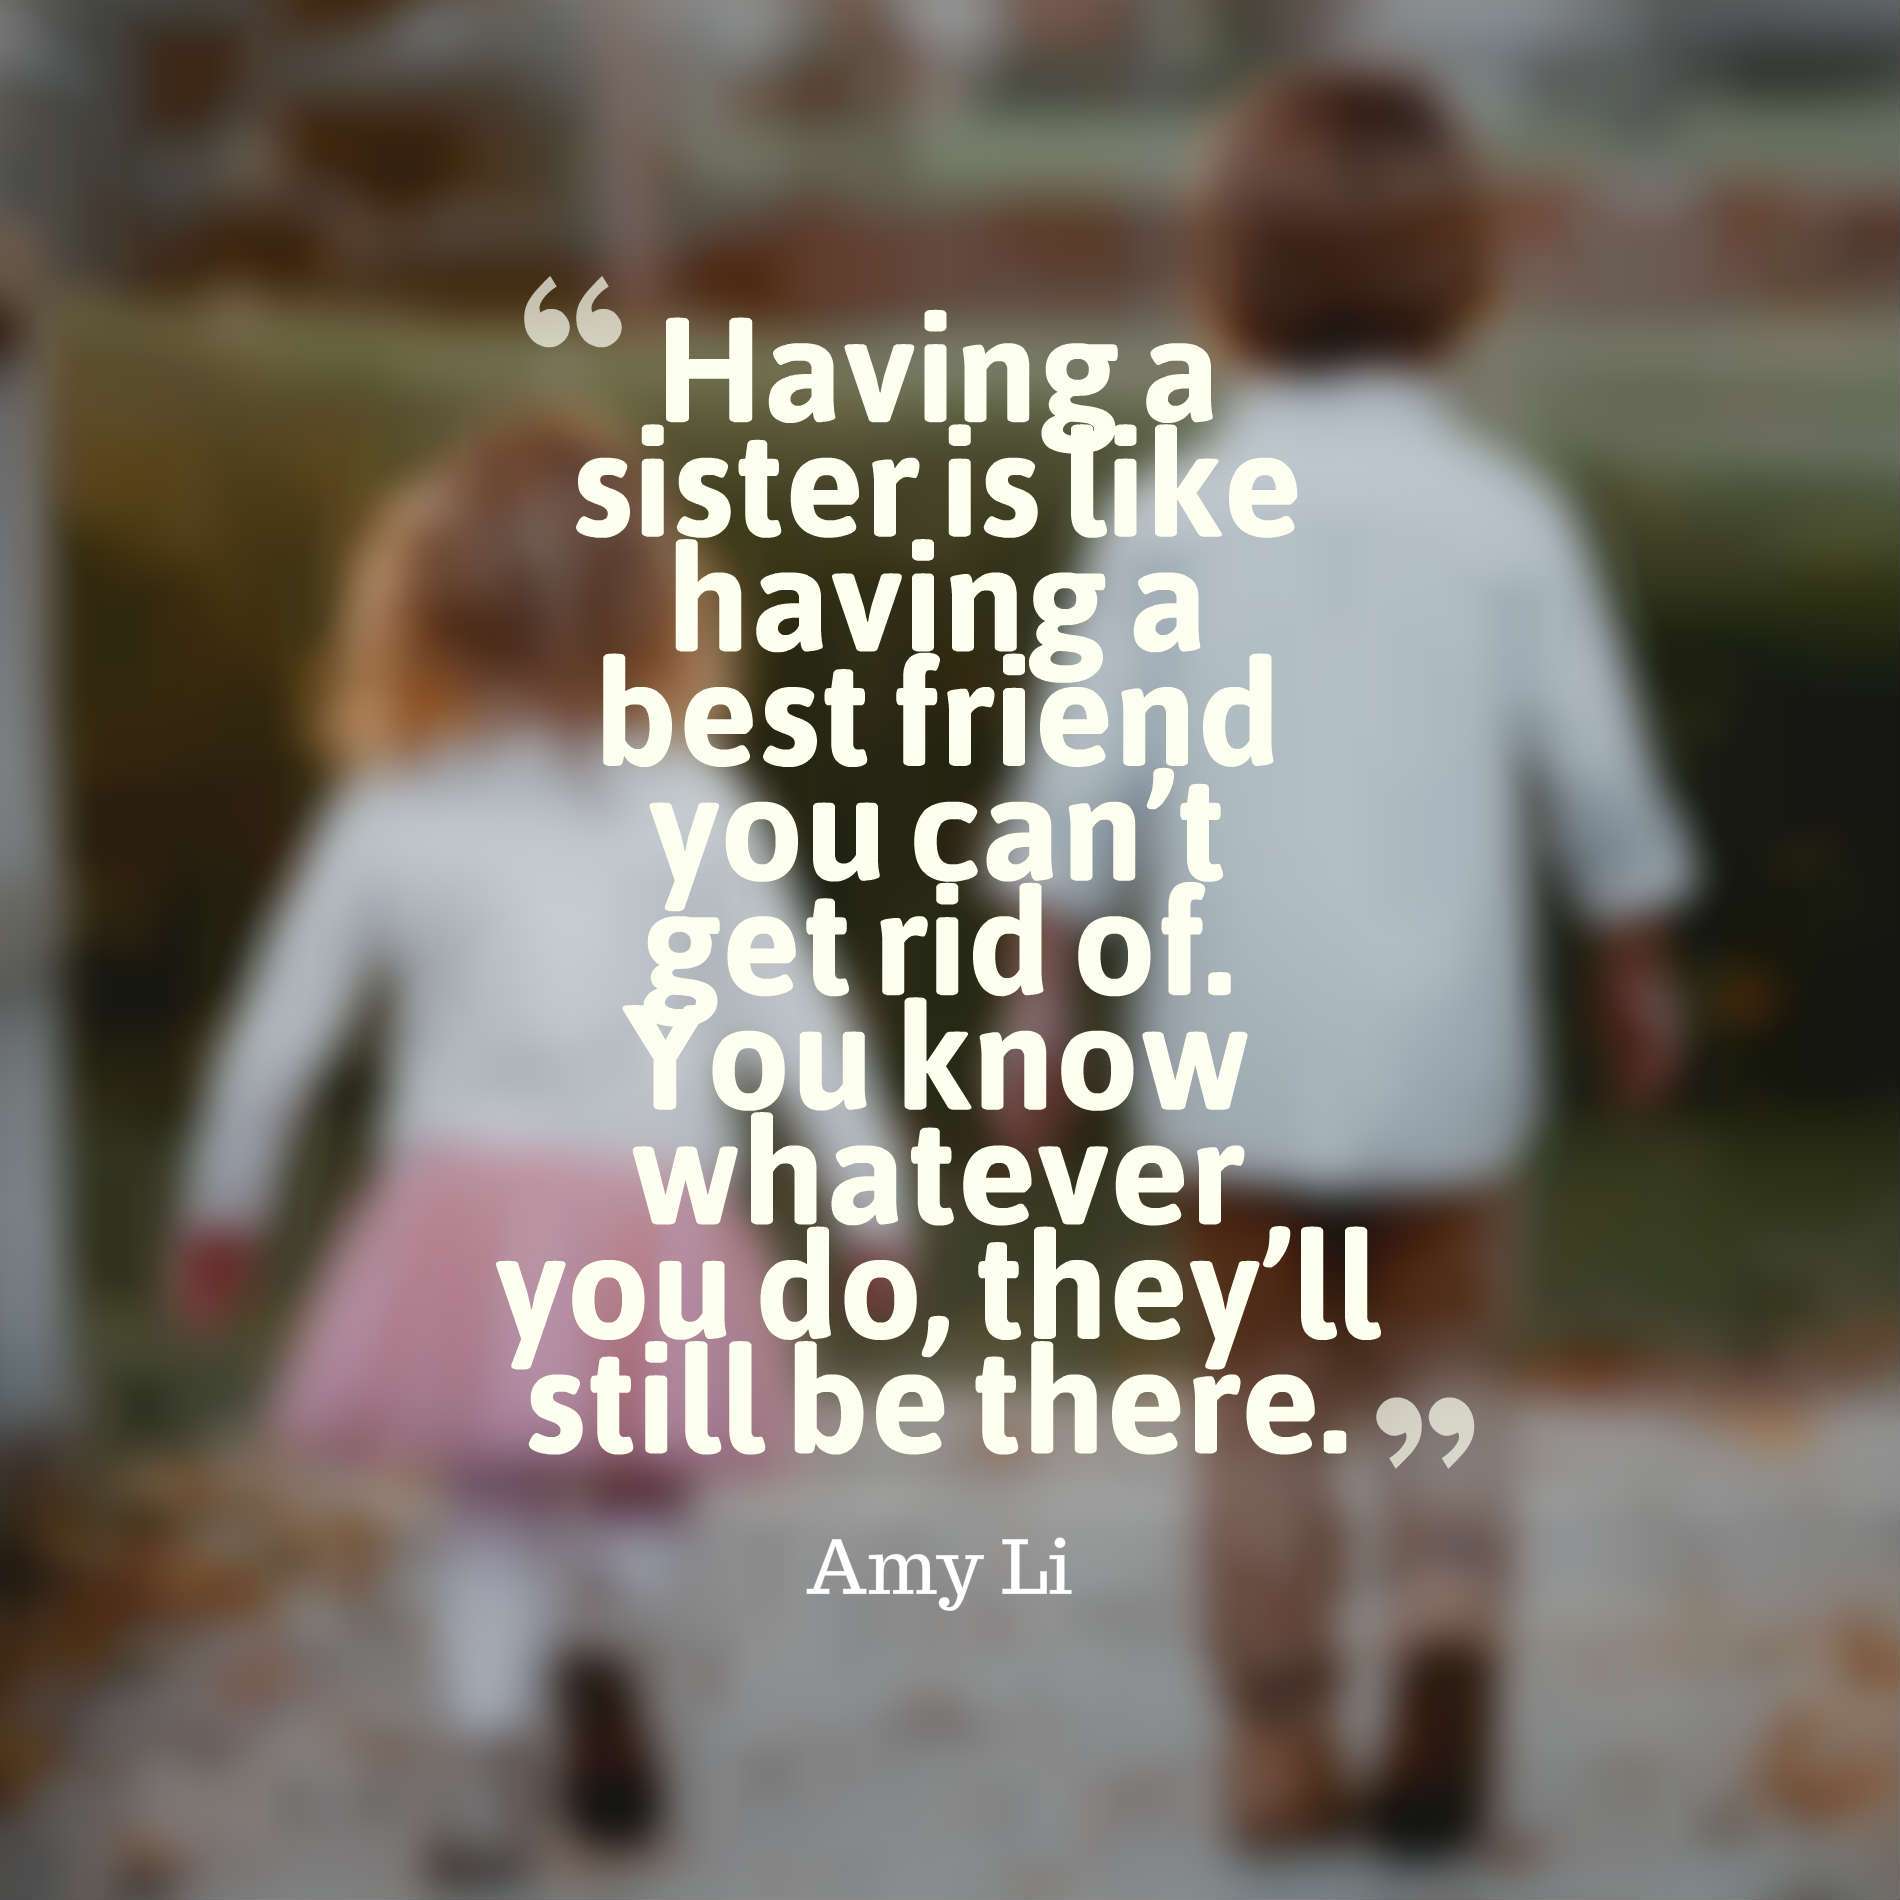 Cute Brother And Sister Quotes With Image